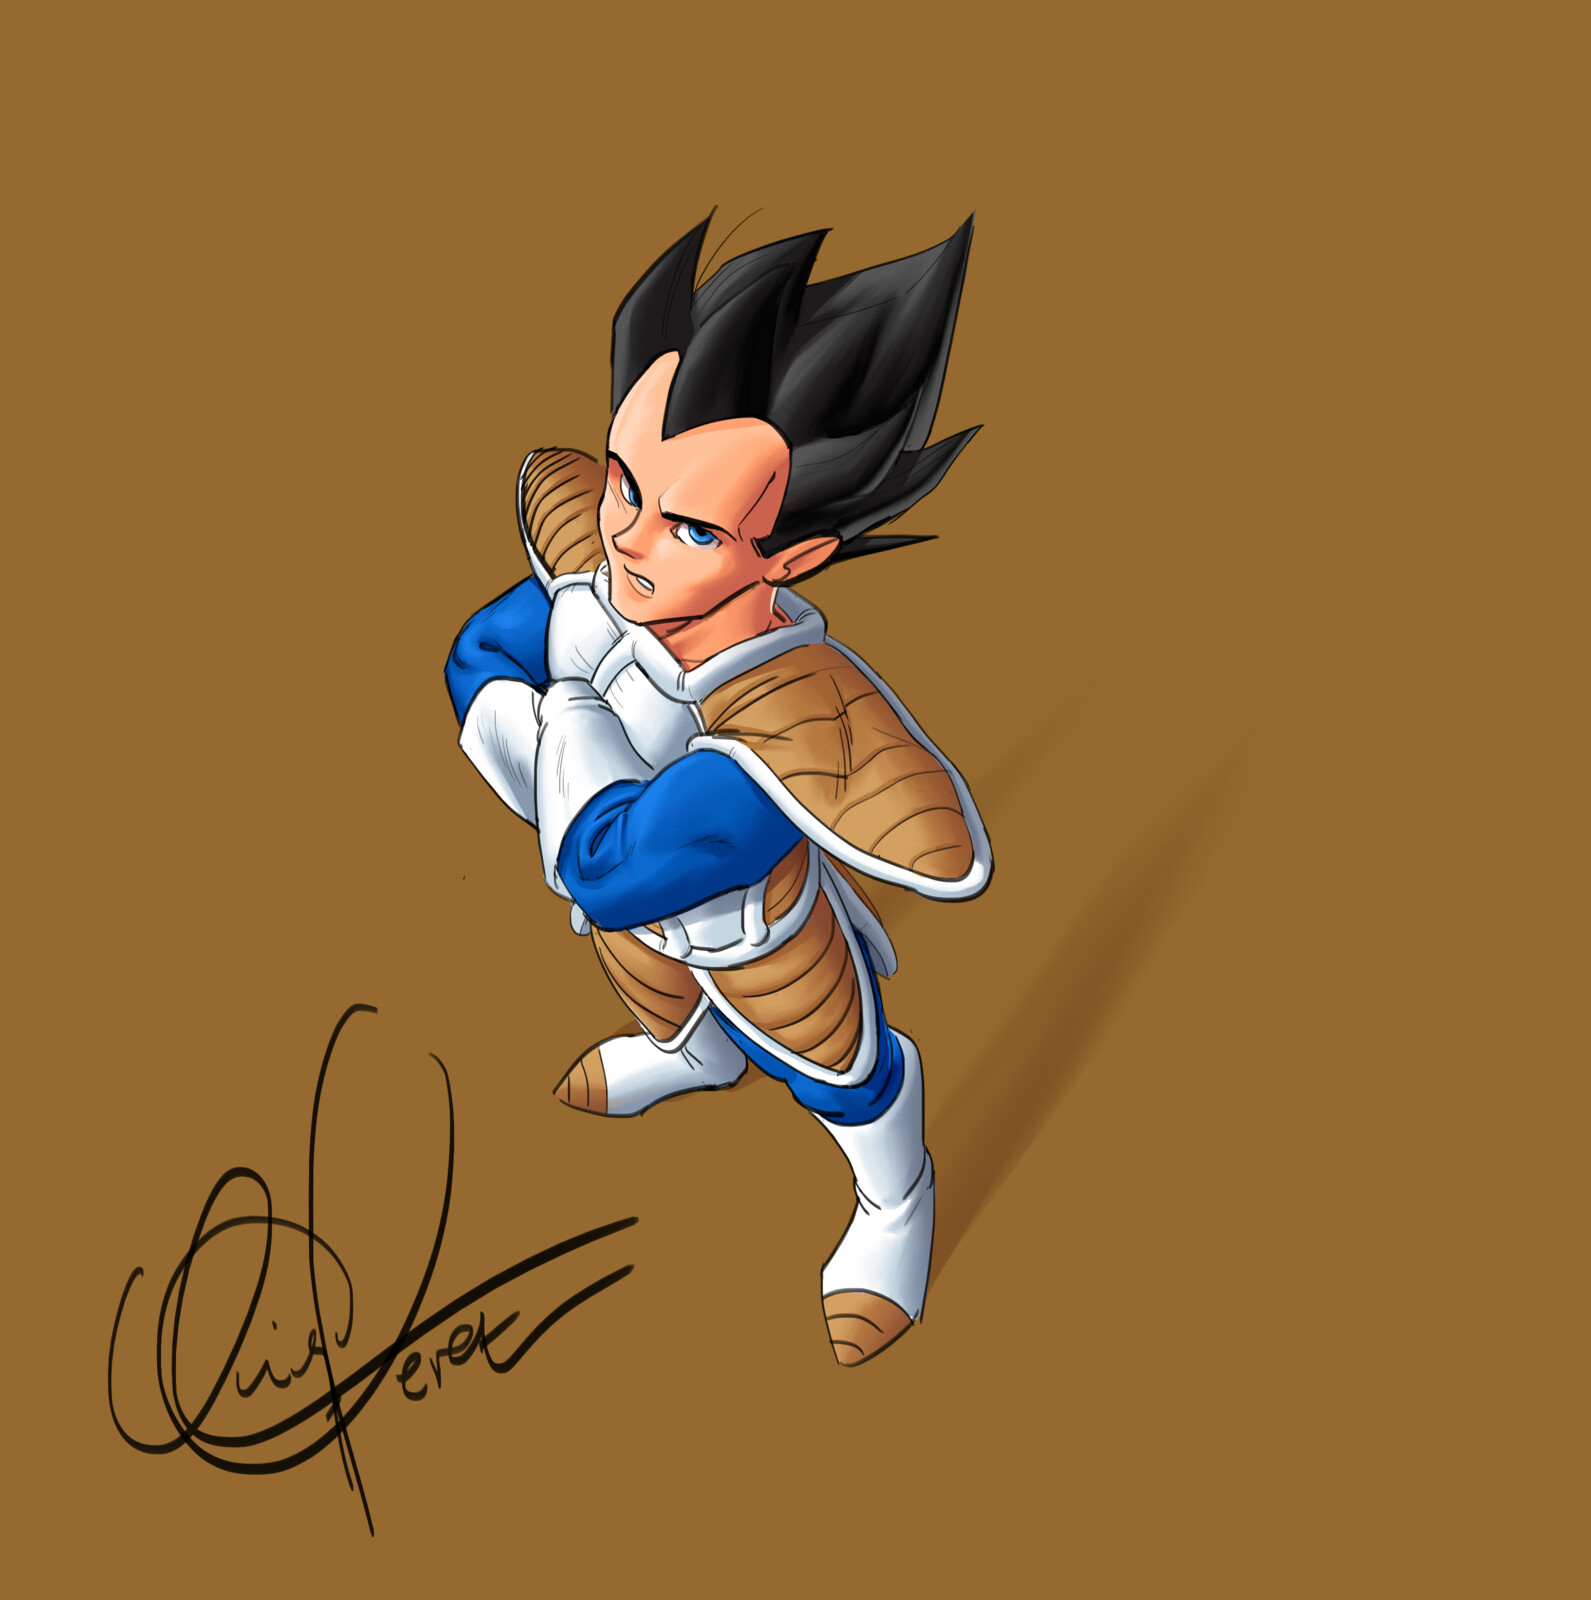 Quick Vegeta from Dragon Ball piece for the #JuneToon 2020 challenge